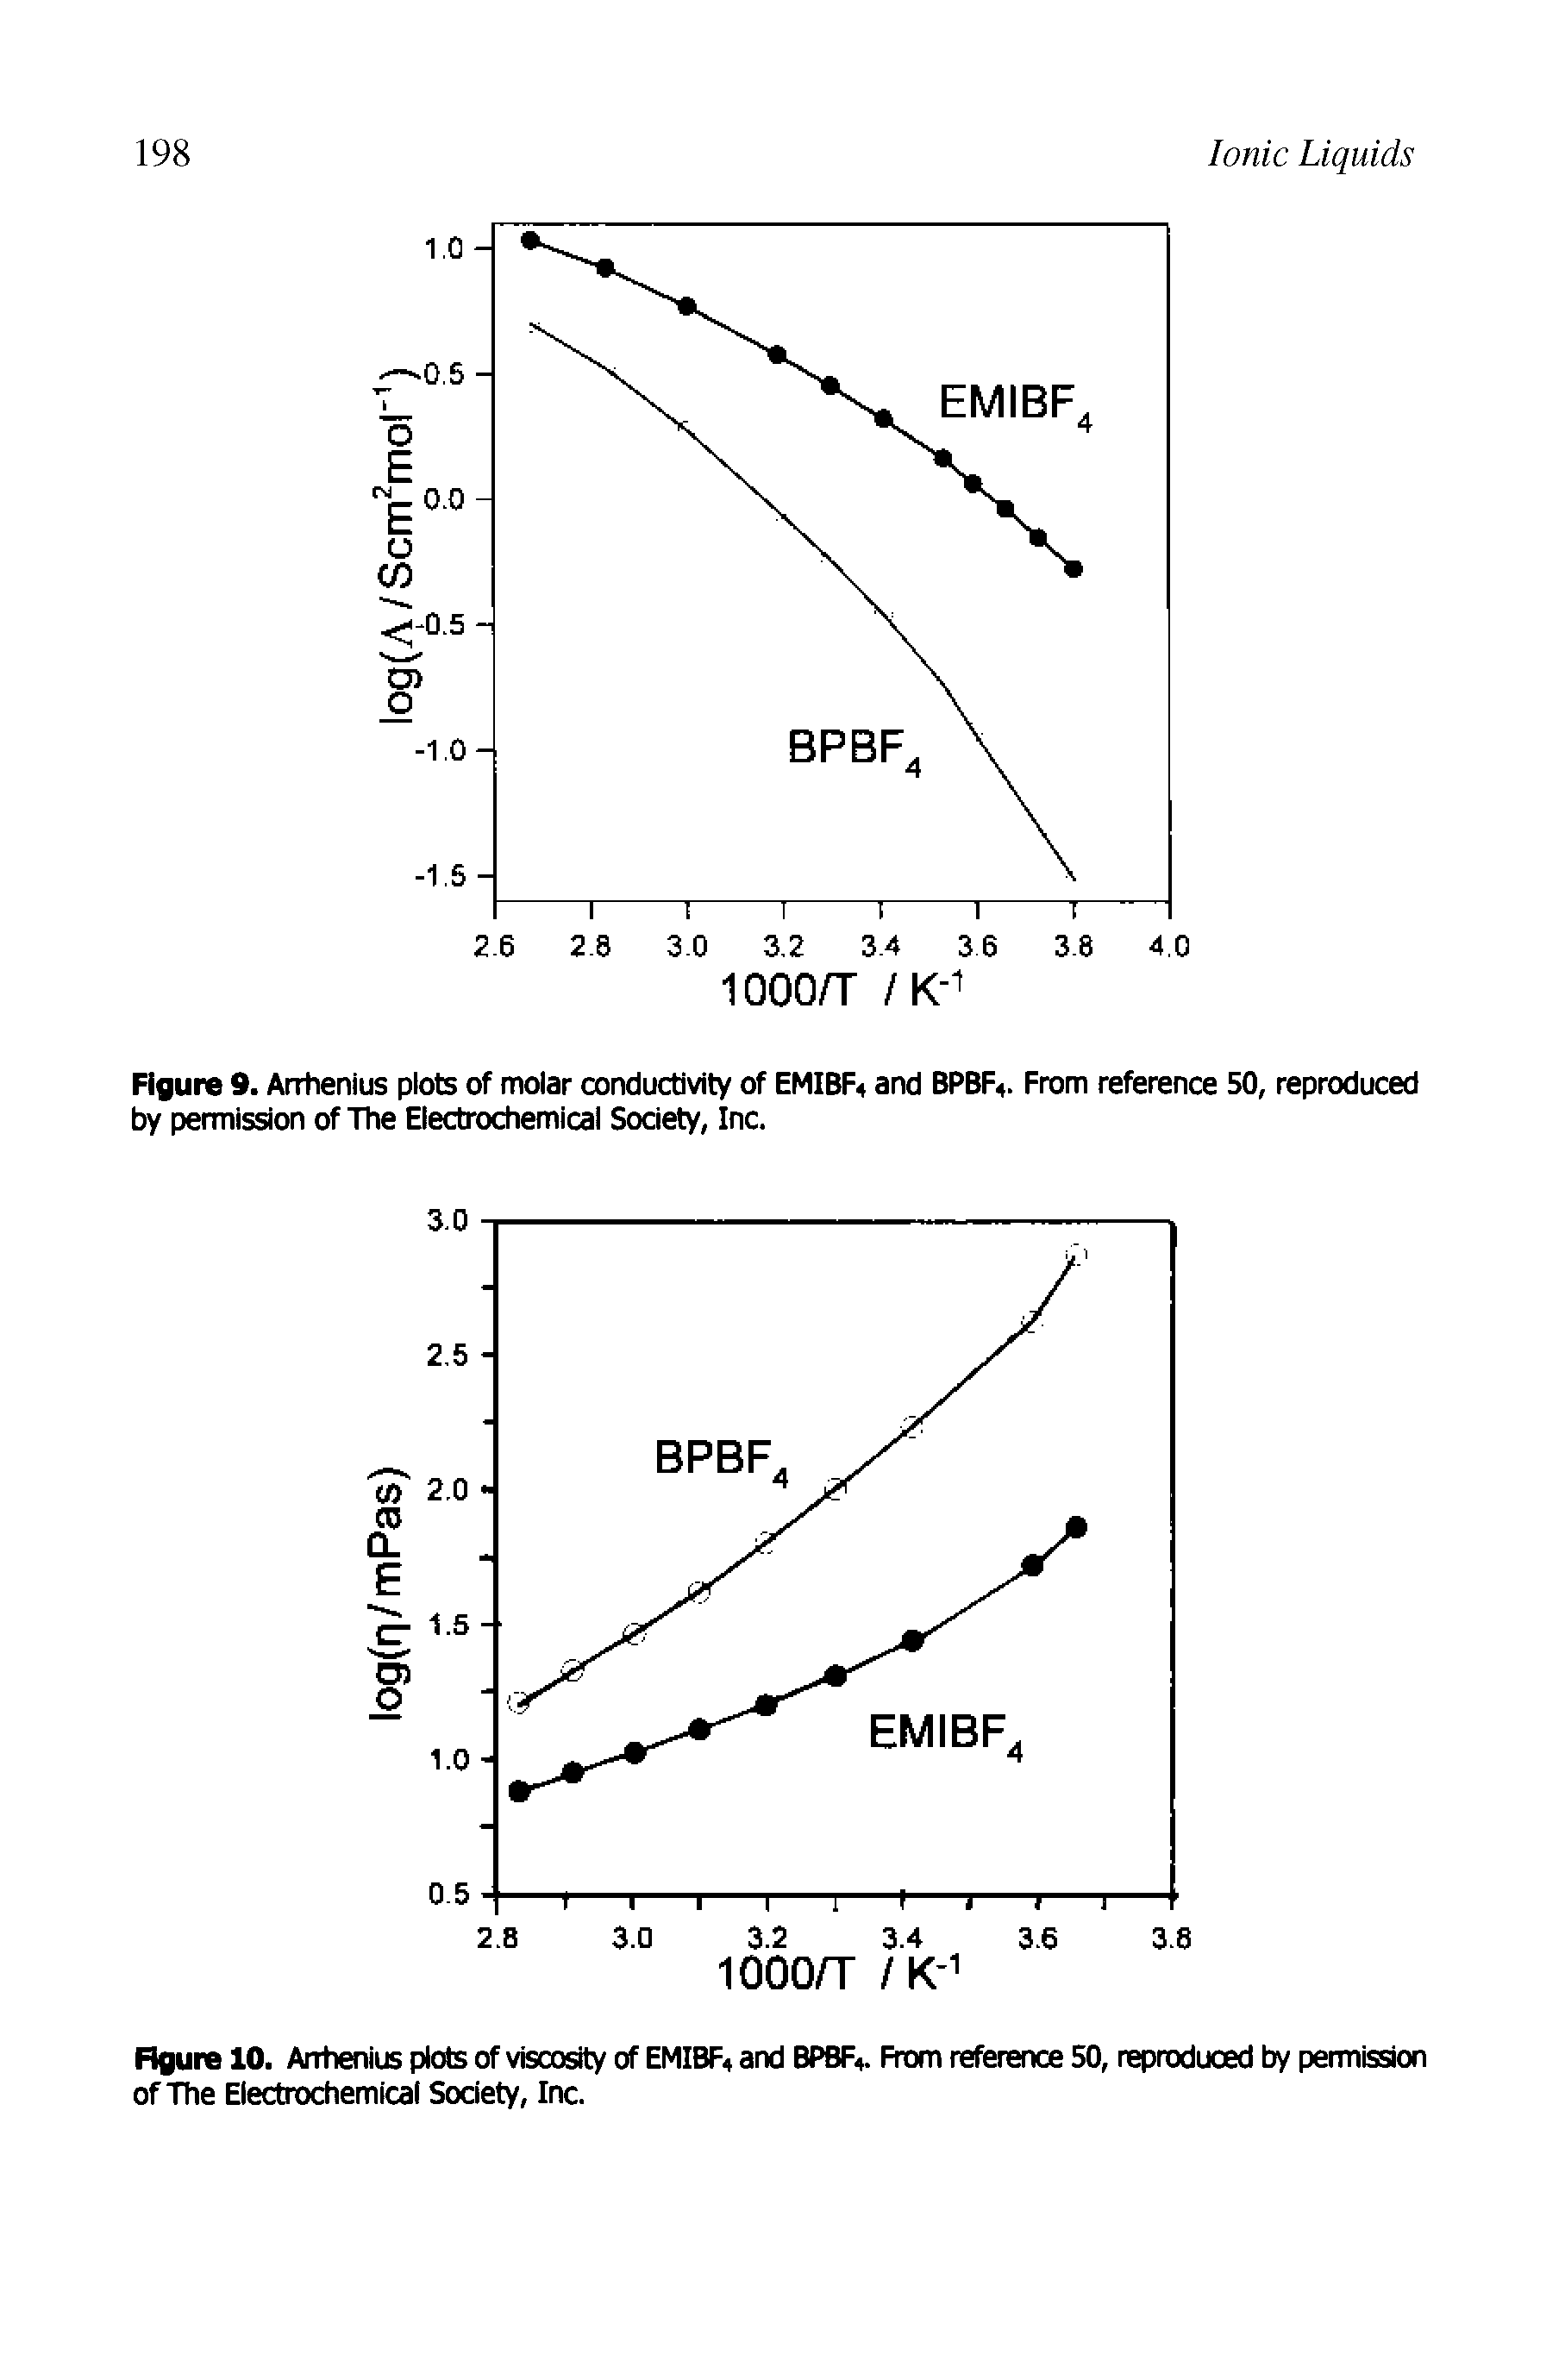 Figure 9. Arrhenius plots of molar conductivity of EMIBF and BPBF. From reference 50, reproduced by permission of The Electrochemical Society, Inc.